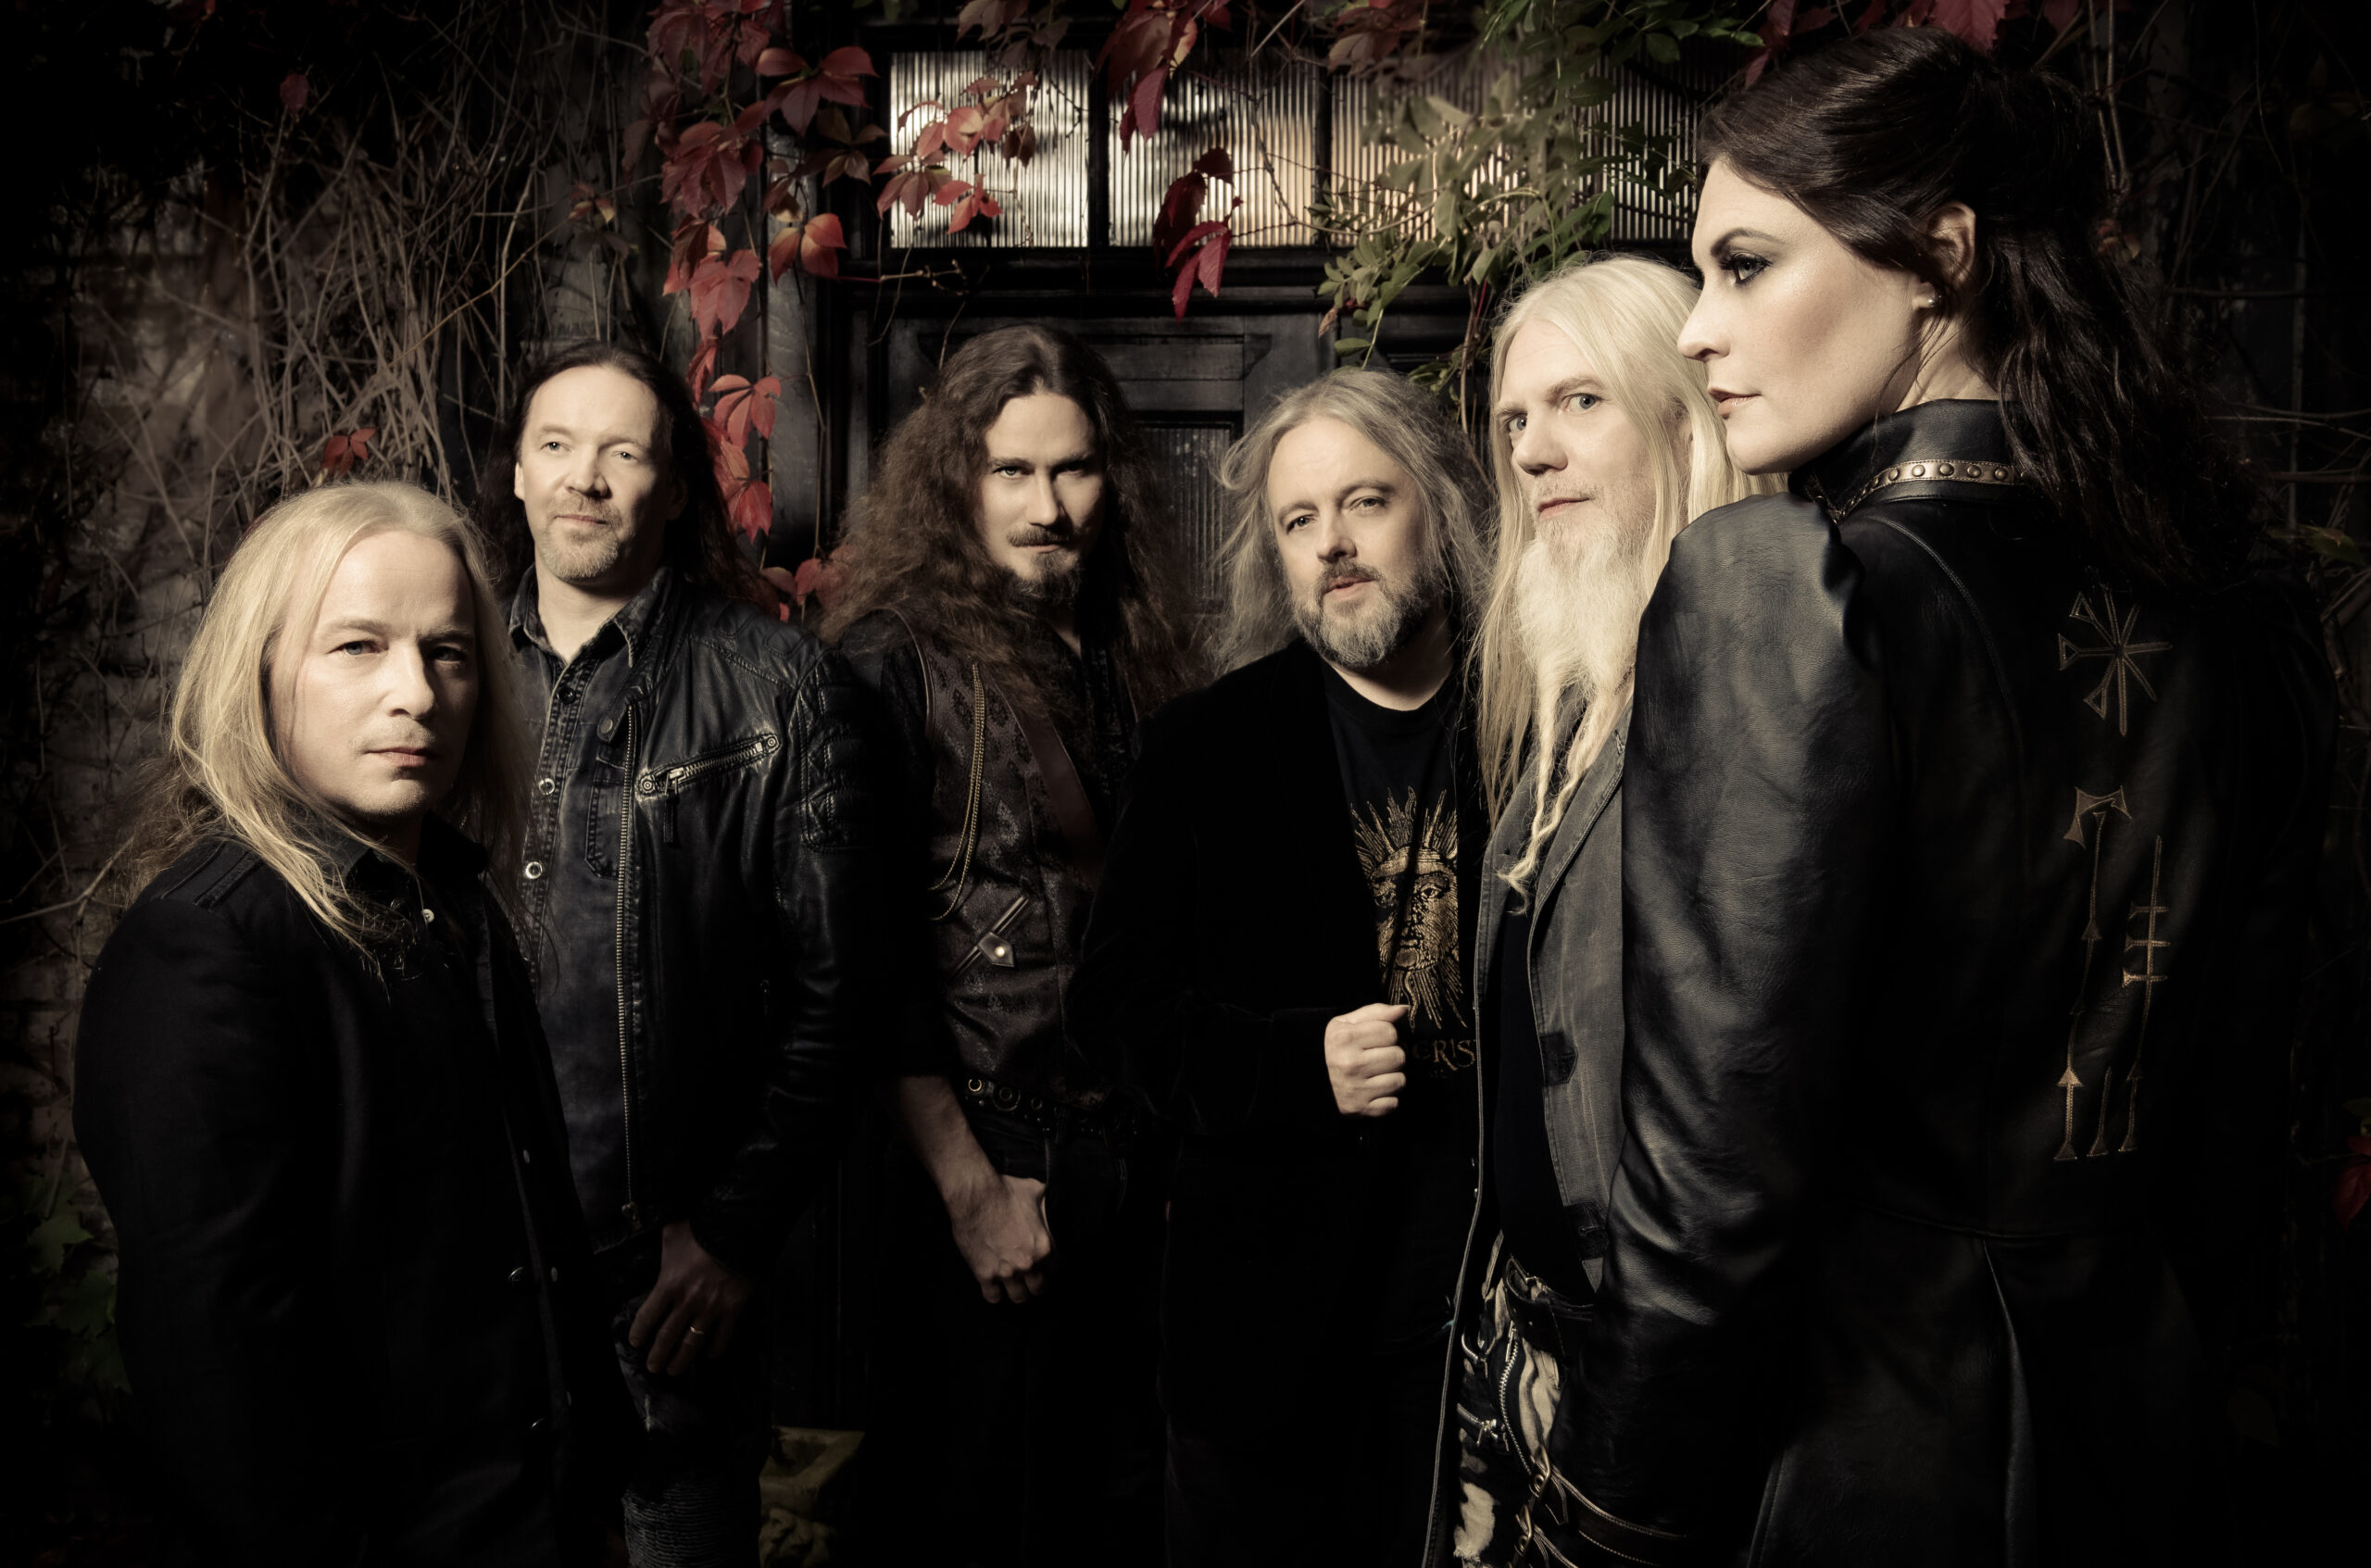 NIGHTWISH RELEASE FIRST SINGLE & VIDEO ‘NOISE’ FROM THEIR UPCOMING ALBUM HUMAN. :II: NATURE. TO BE RELEASED APRIL 10th